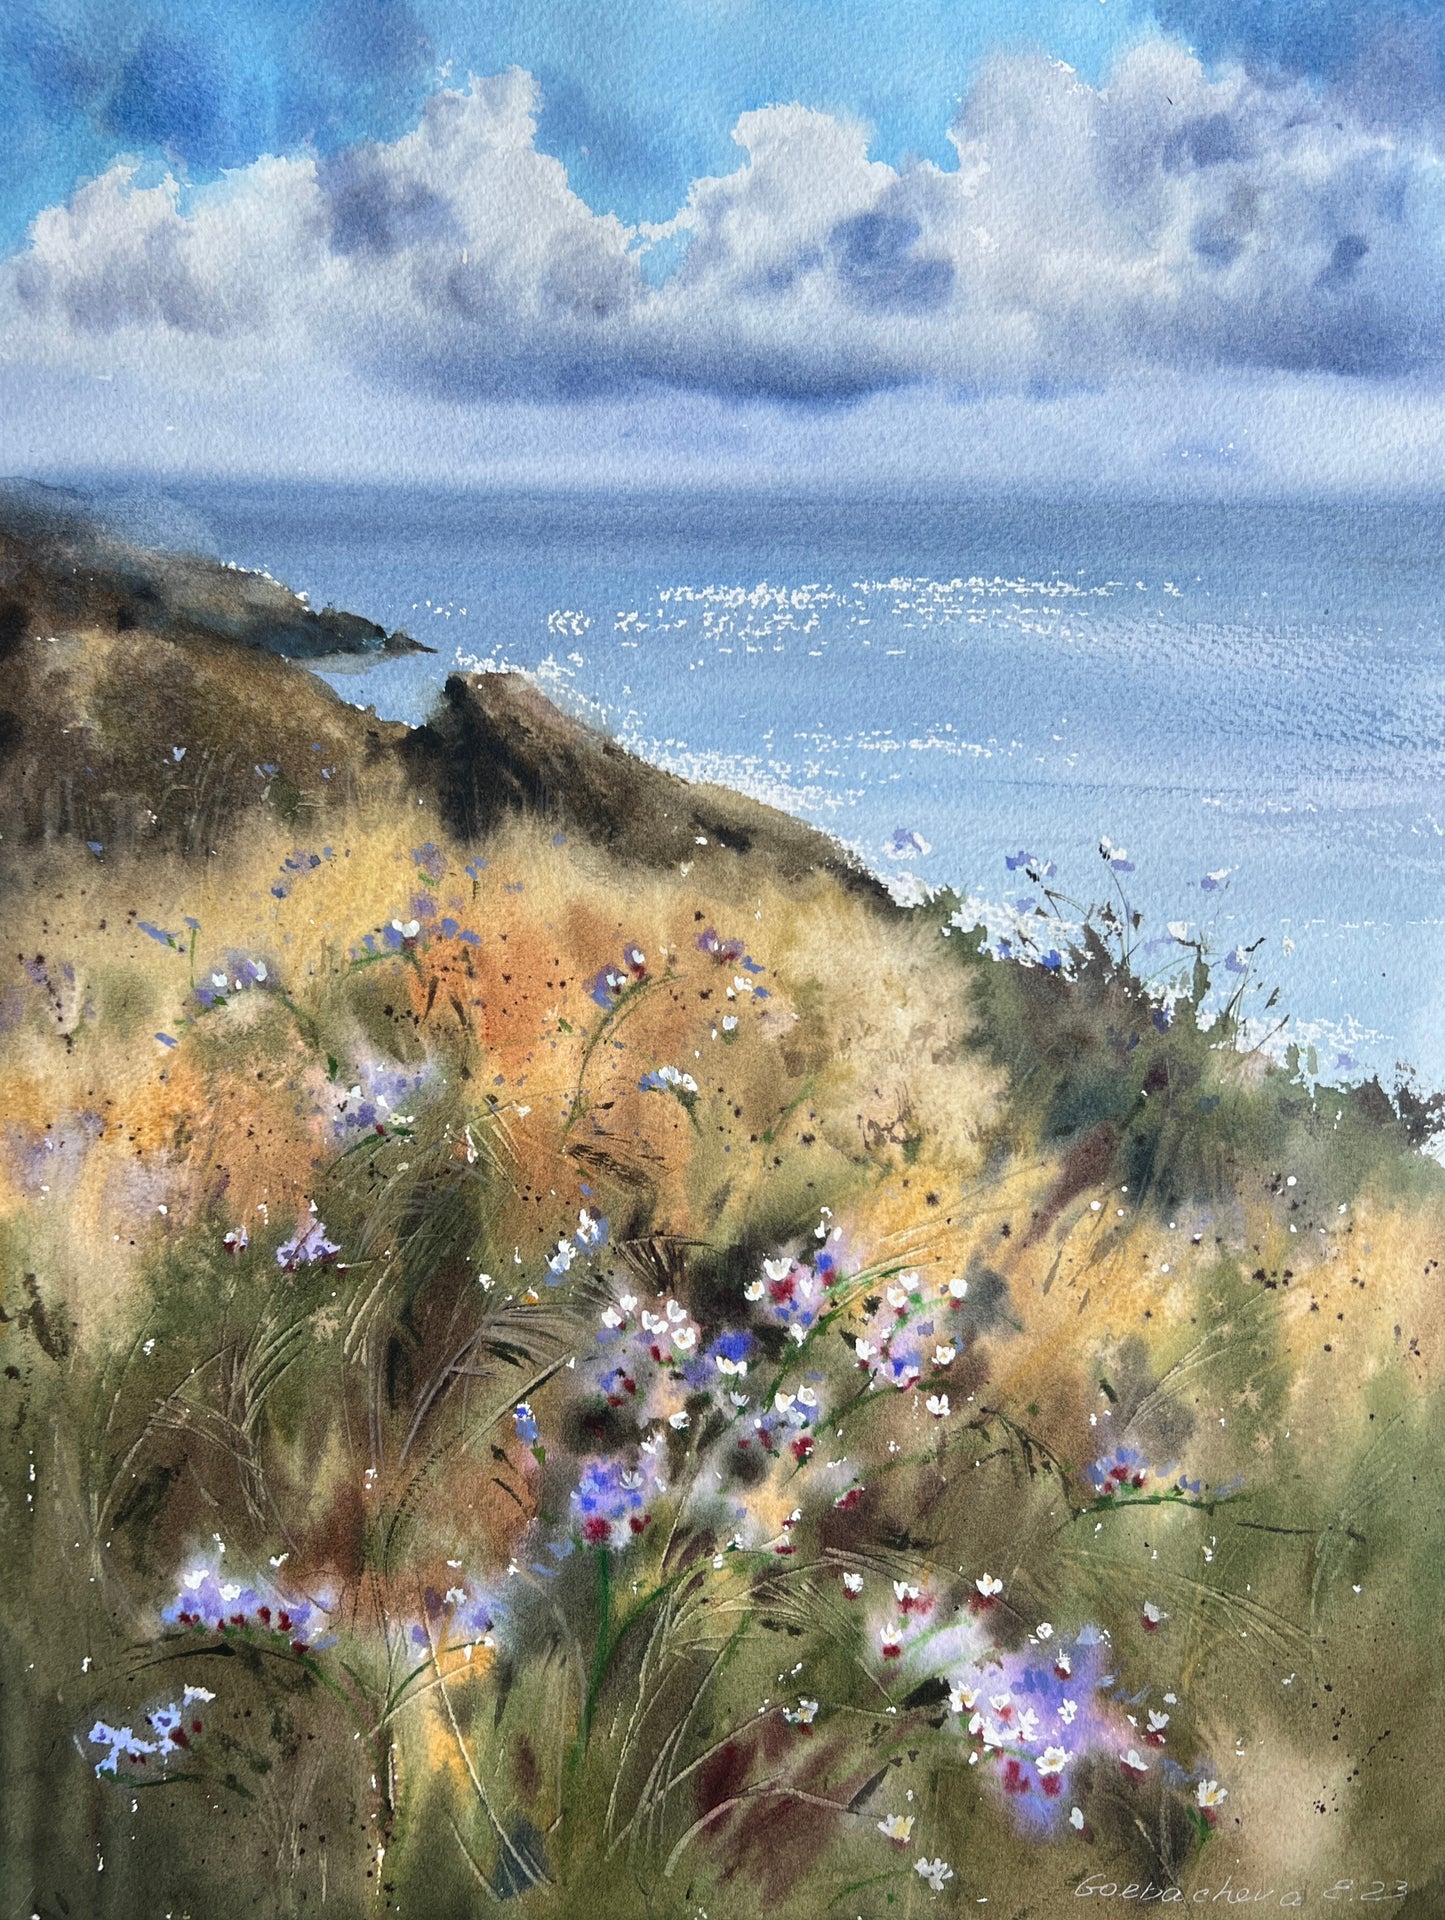 Coastal Wildflower Painting Original Watercolor, Seaview Art, Seascape Living room Wall Decor, Gift for Sea Lover